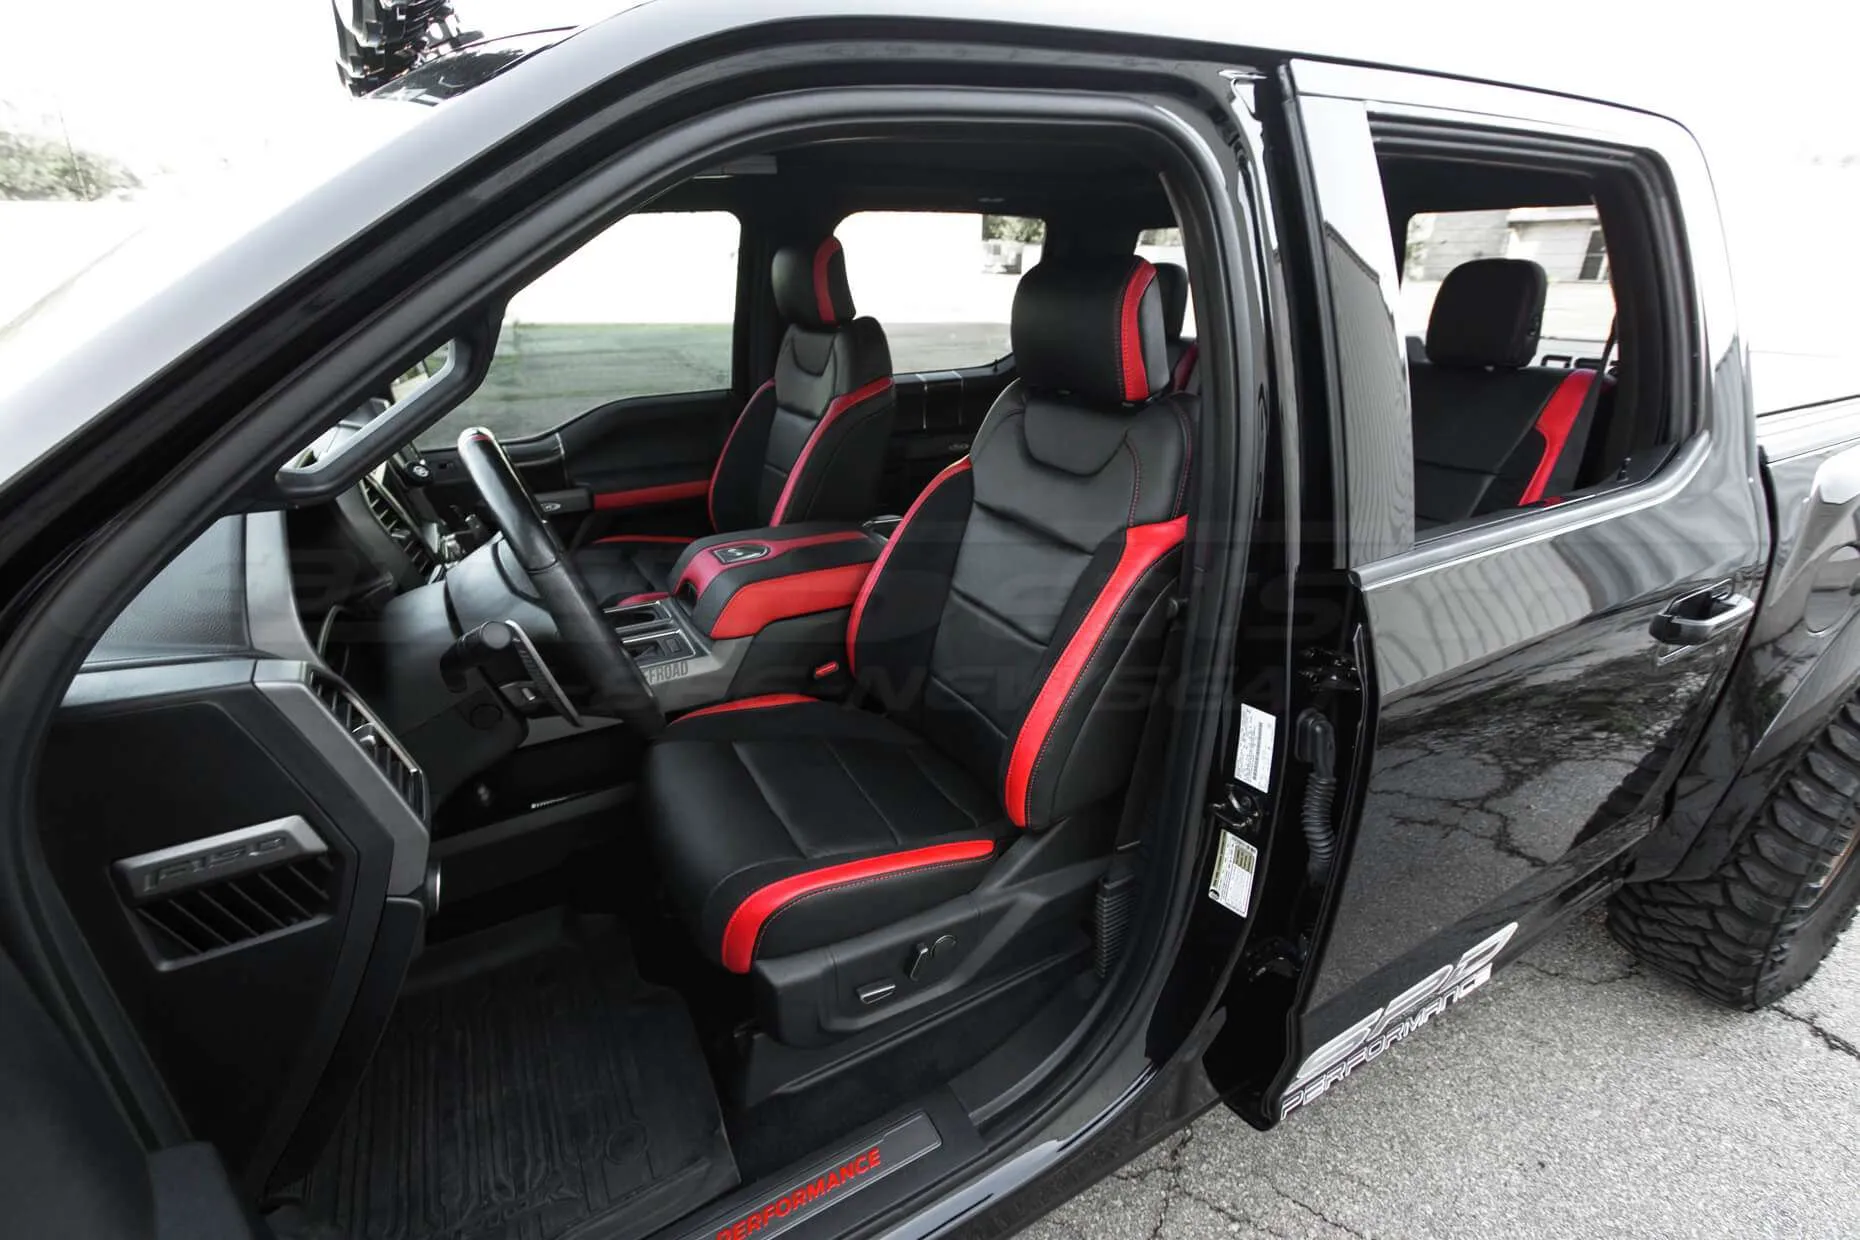 Ford Raptor installed upholstery kit - Black & Bright Red - Front seat wide angle